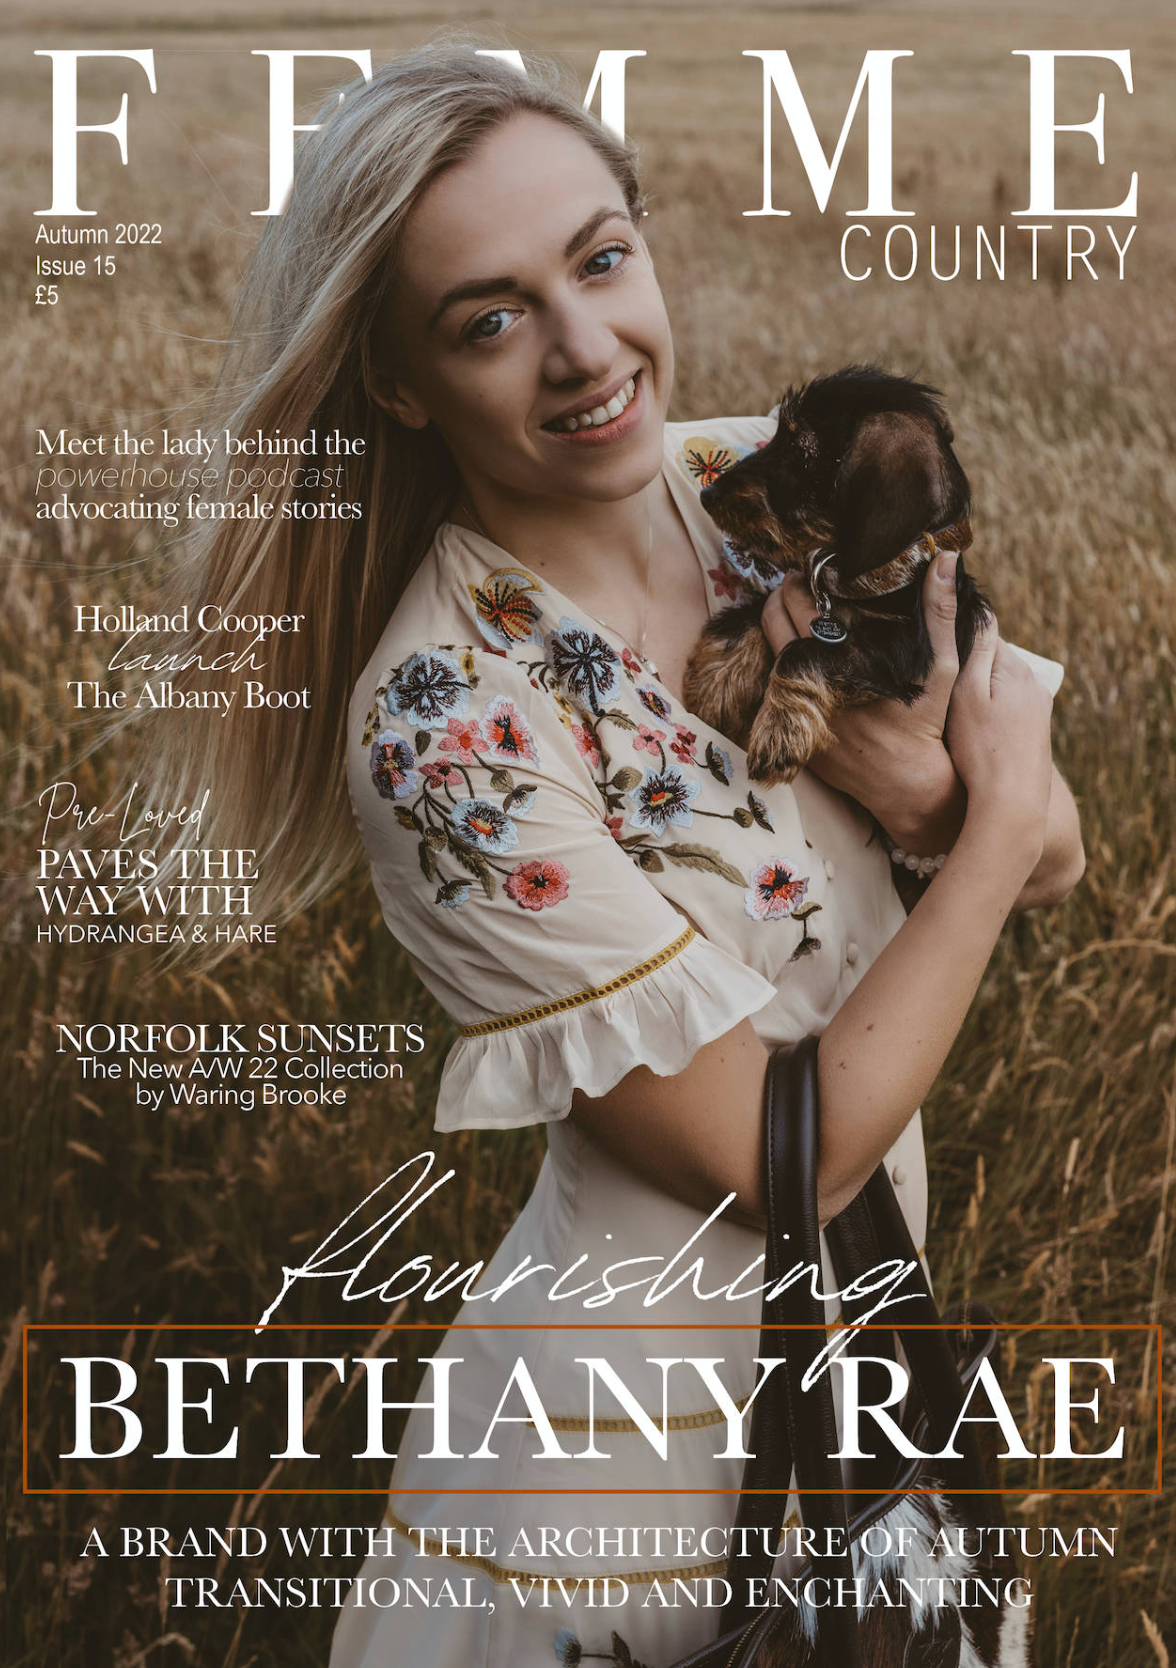 HC in Femme Country Magazine